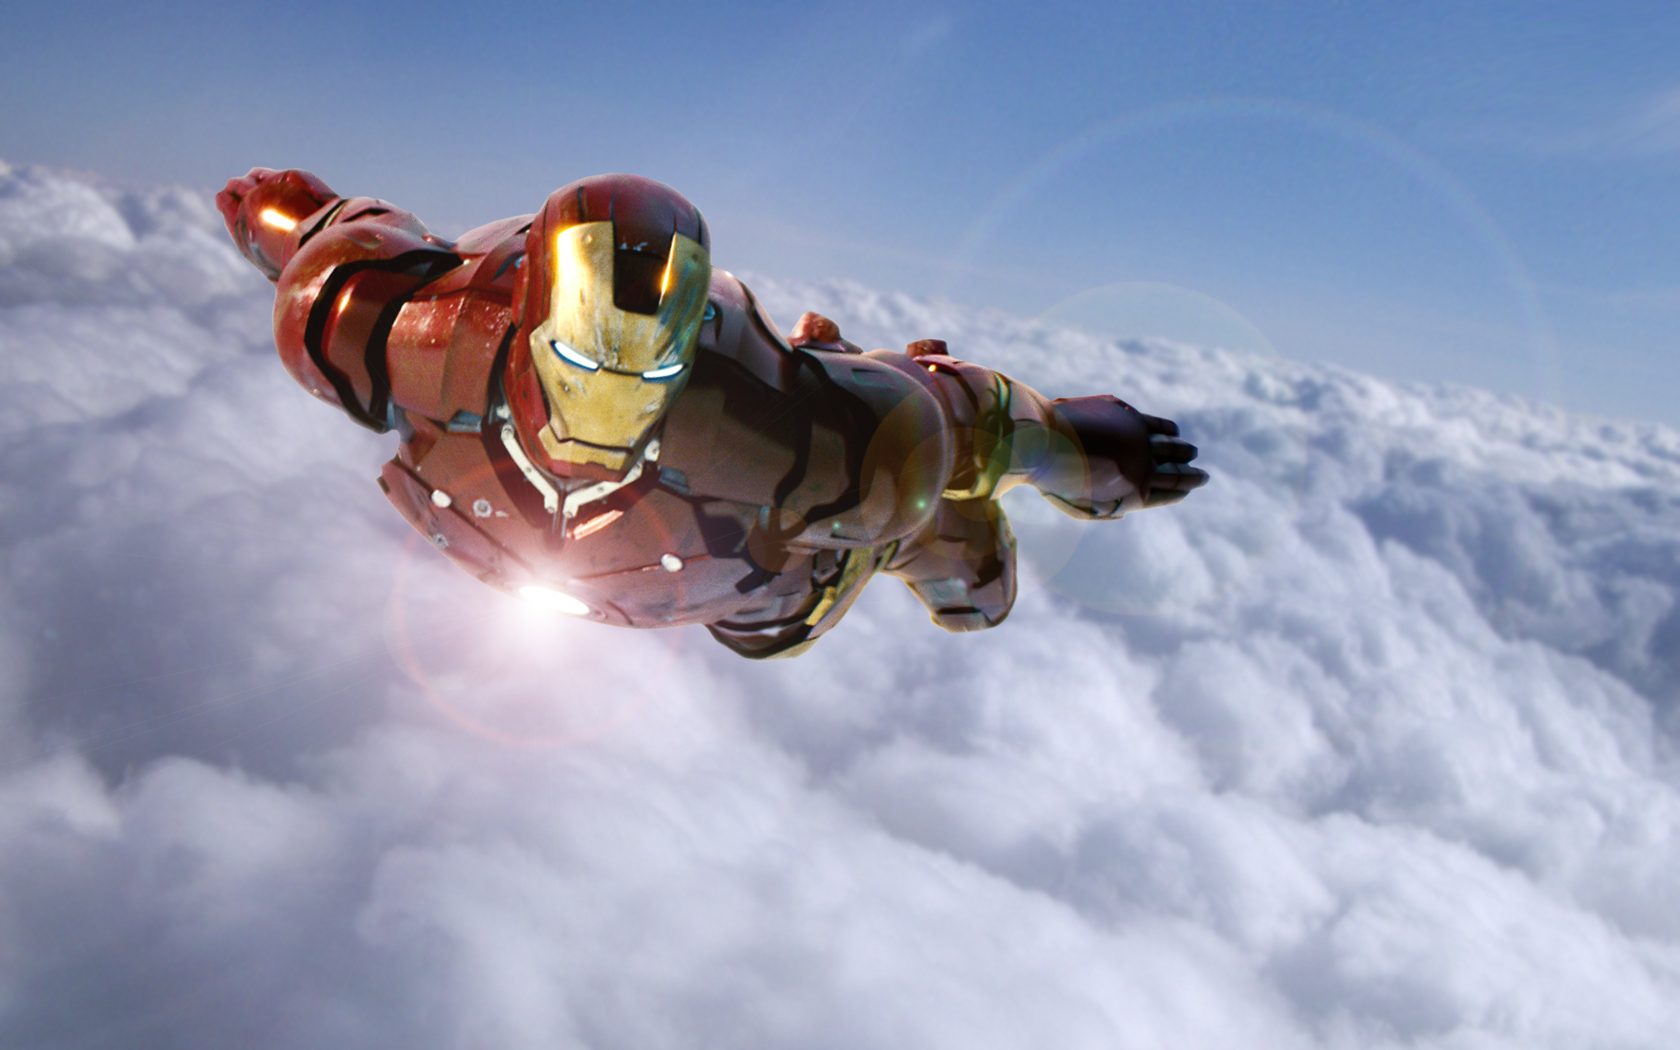  Iron Man HQ Background Wallpapers